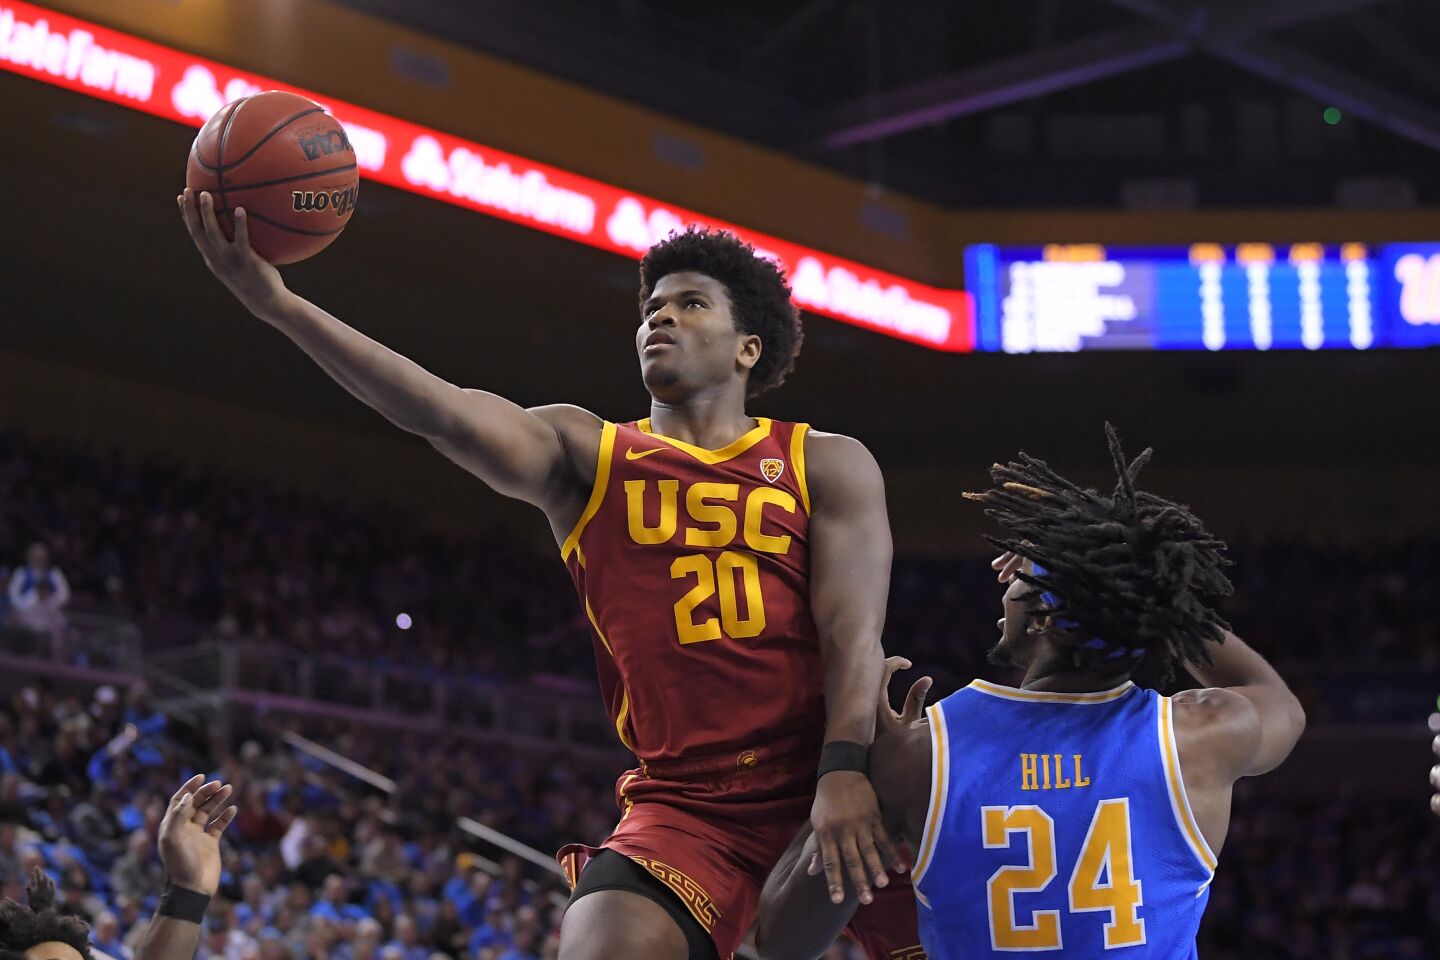 USC guard Ethan Anderson shoots over UCLA forward Jalen Hill during the first half of a game Jan. 11 at Pauley Pavilion.